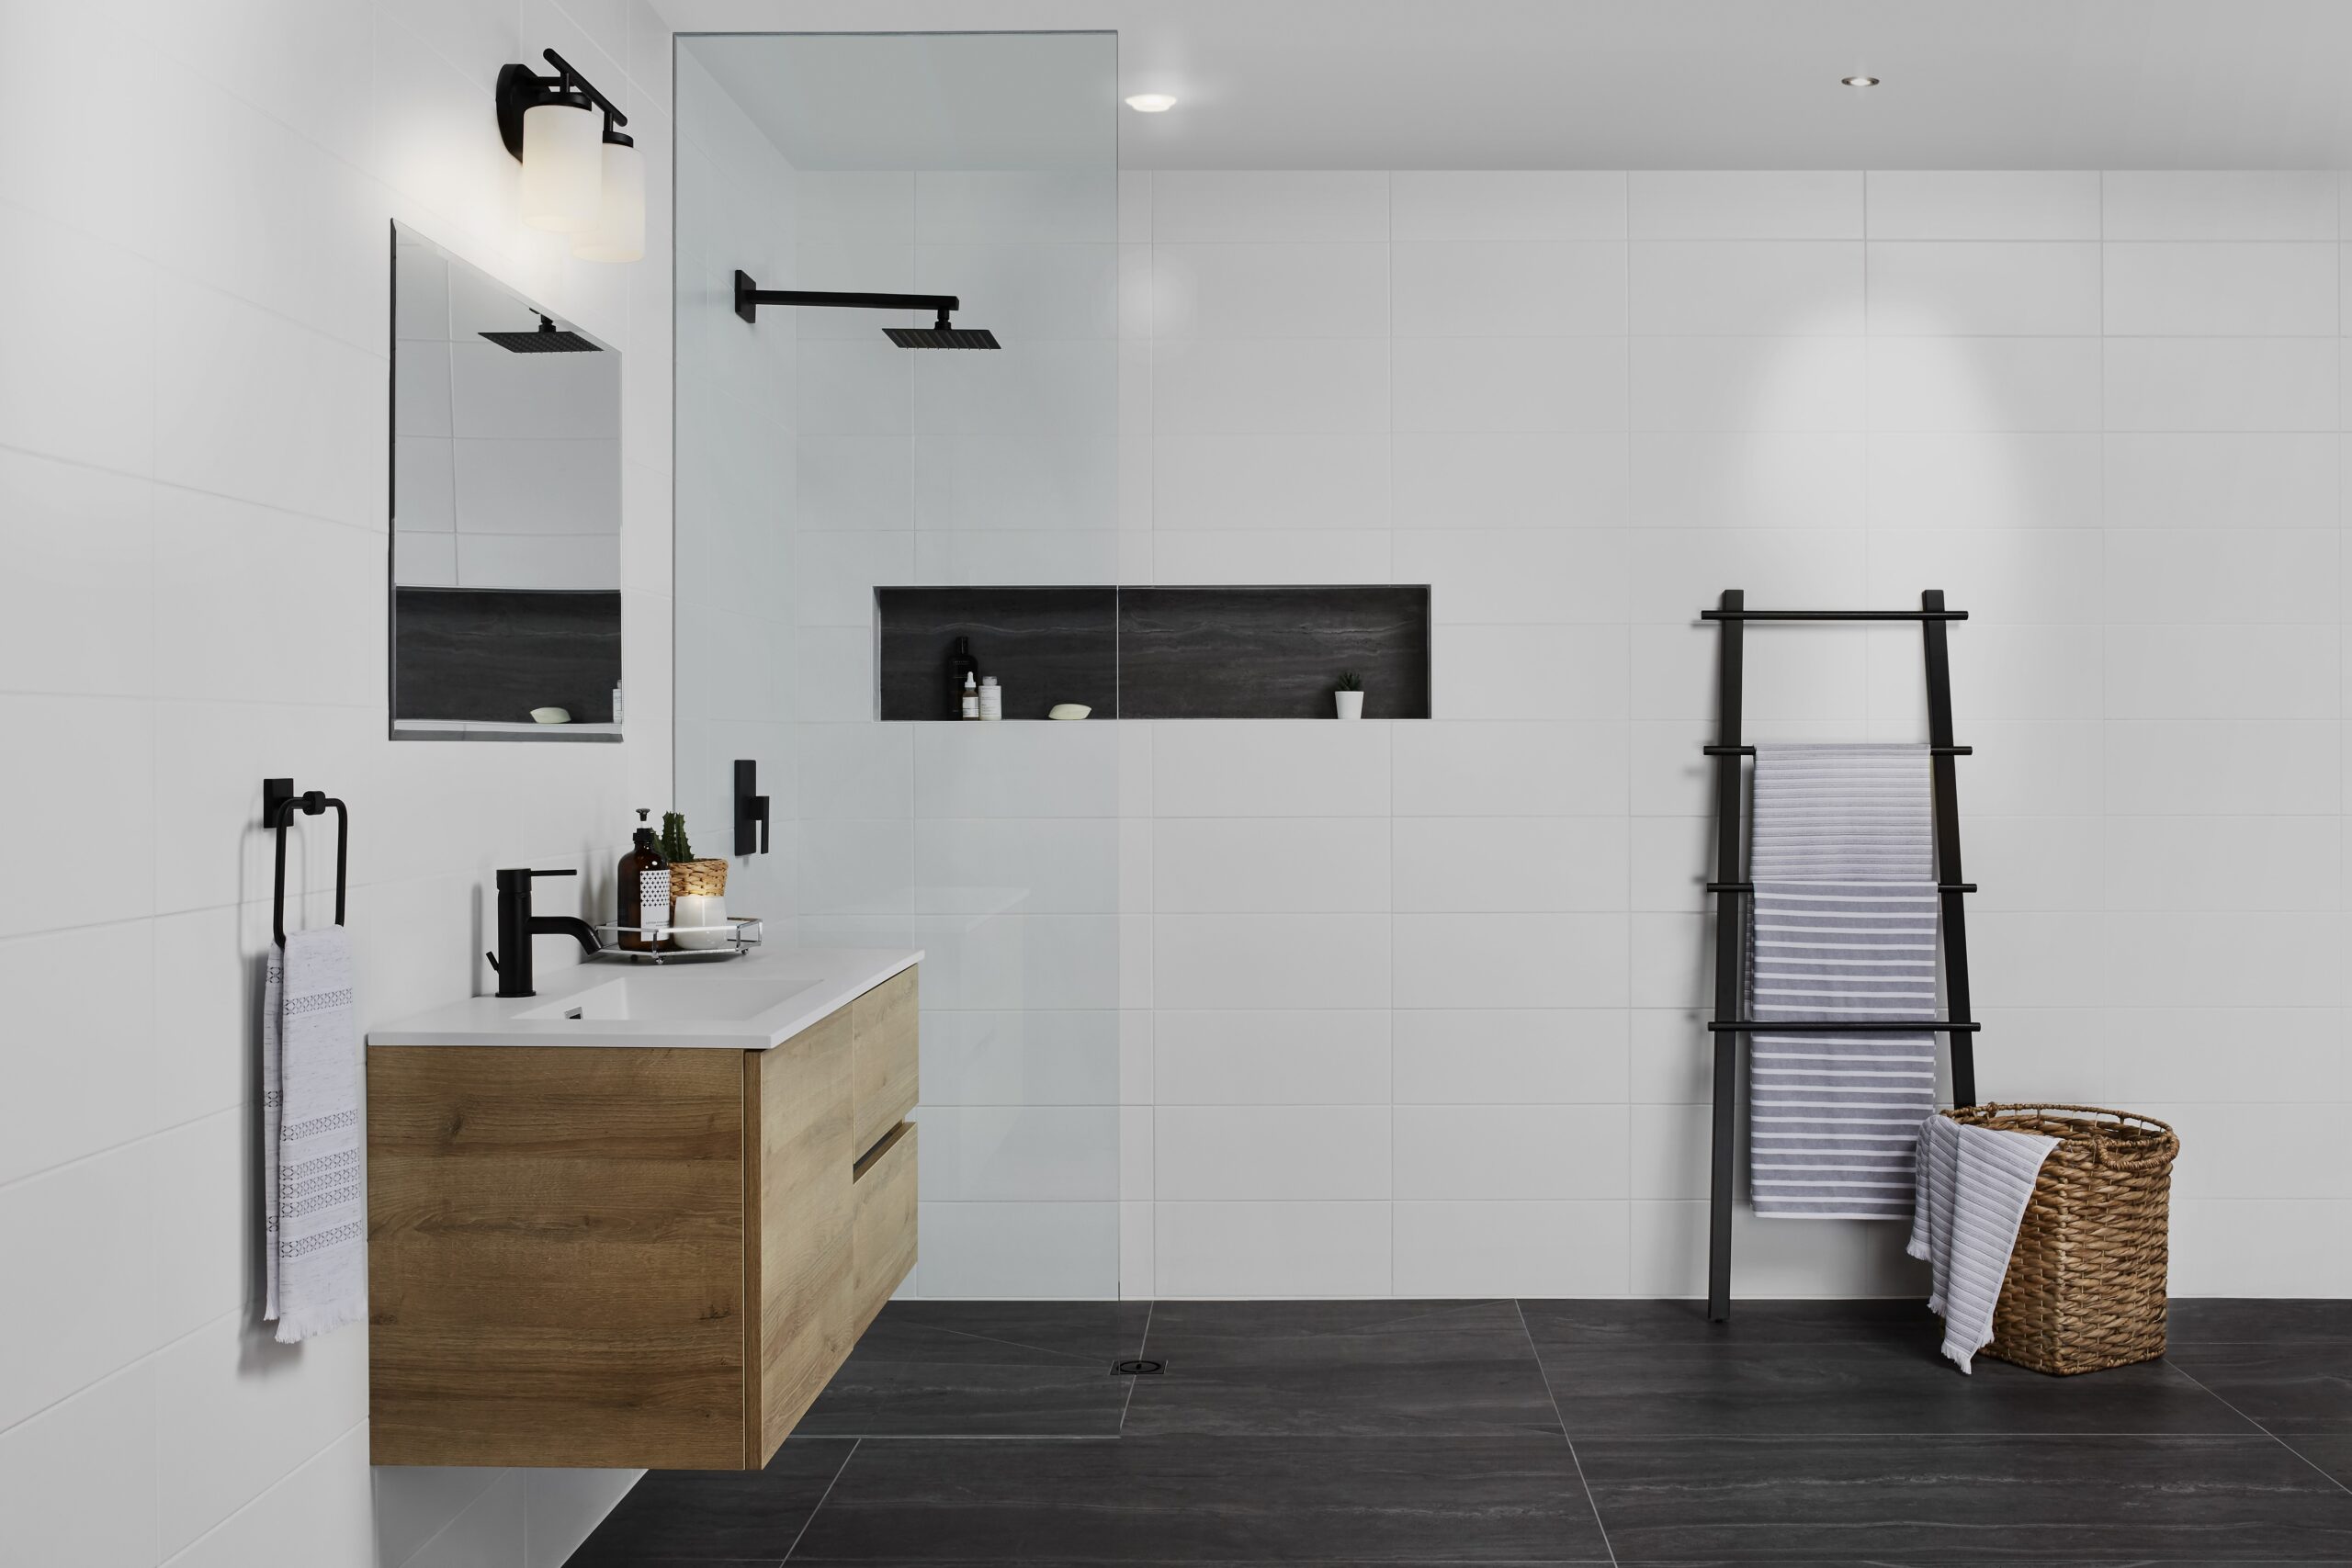 Future proof your bathroom with Schlüter-Systems